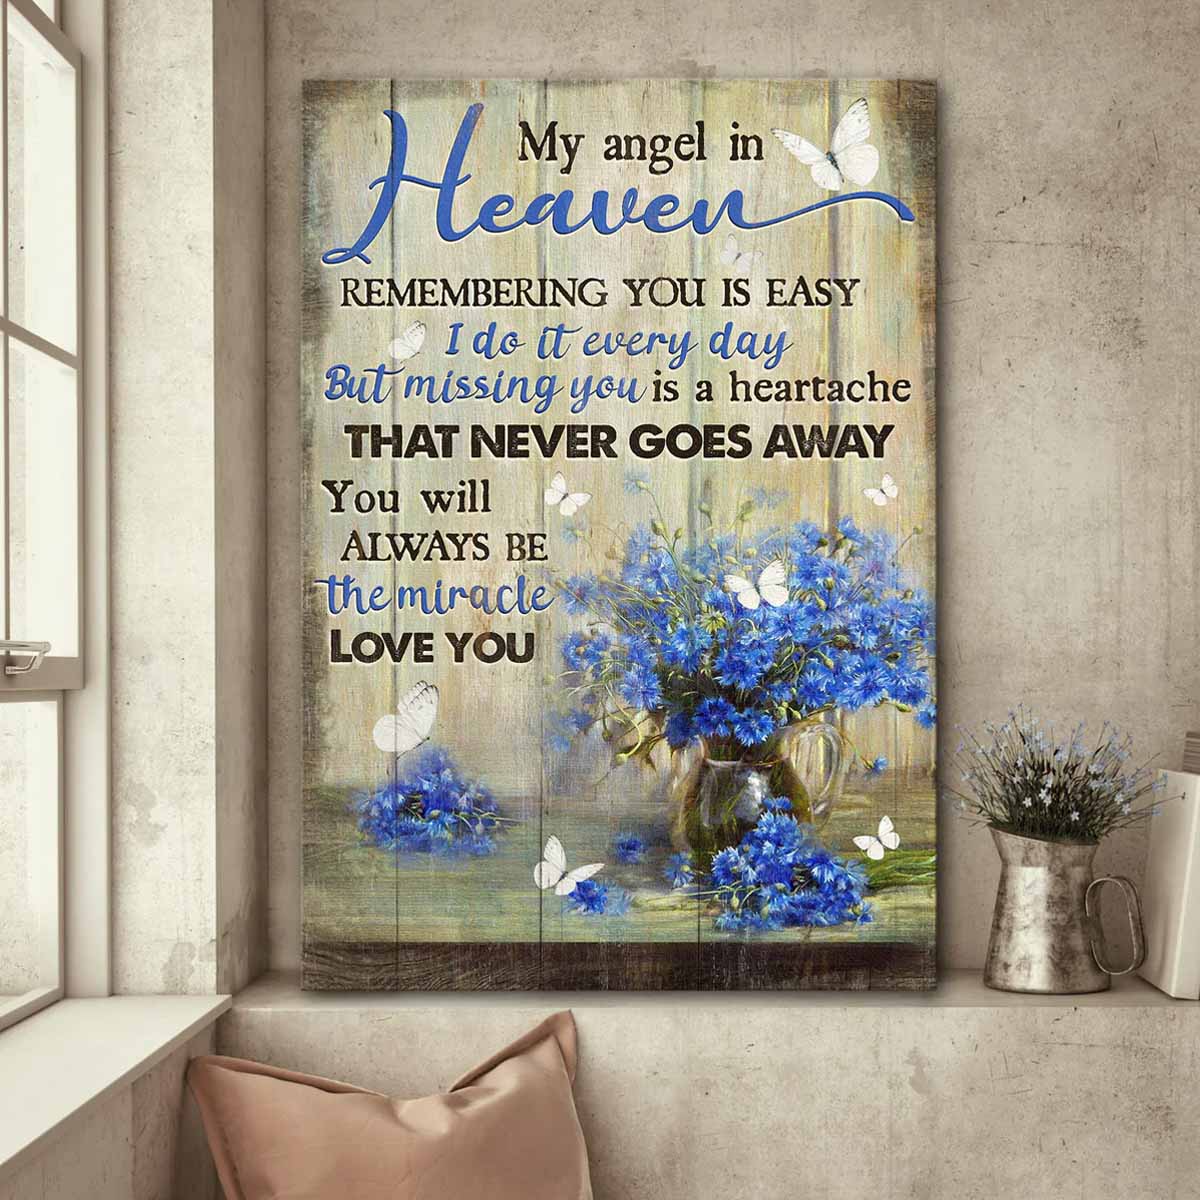 Jesus Portrait Canvas - Blue flower, Glass vase, Butterfly Portrait Canvas - Gift For Christian - You will always be the miracle Portrait Canvas